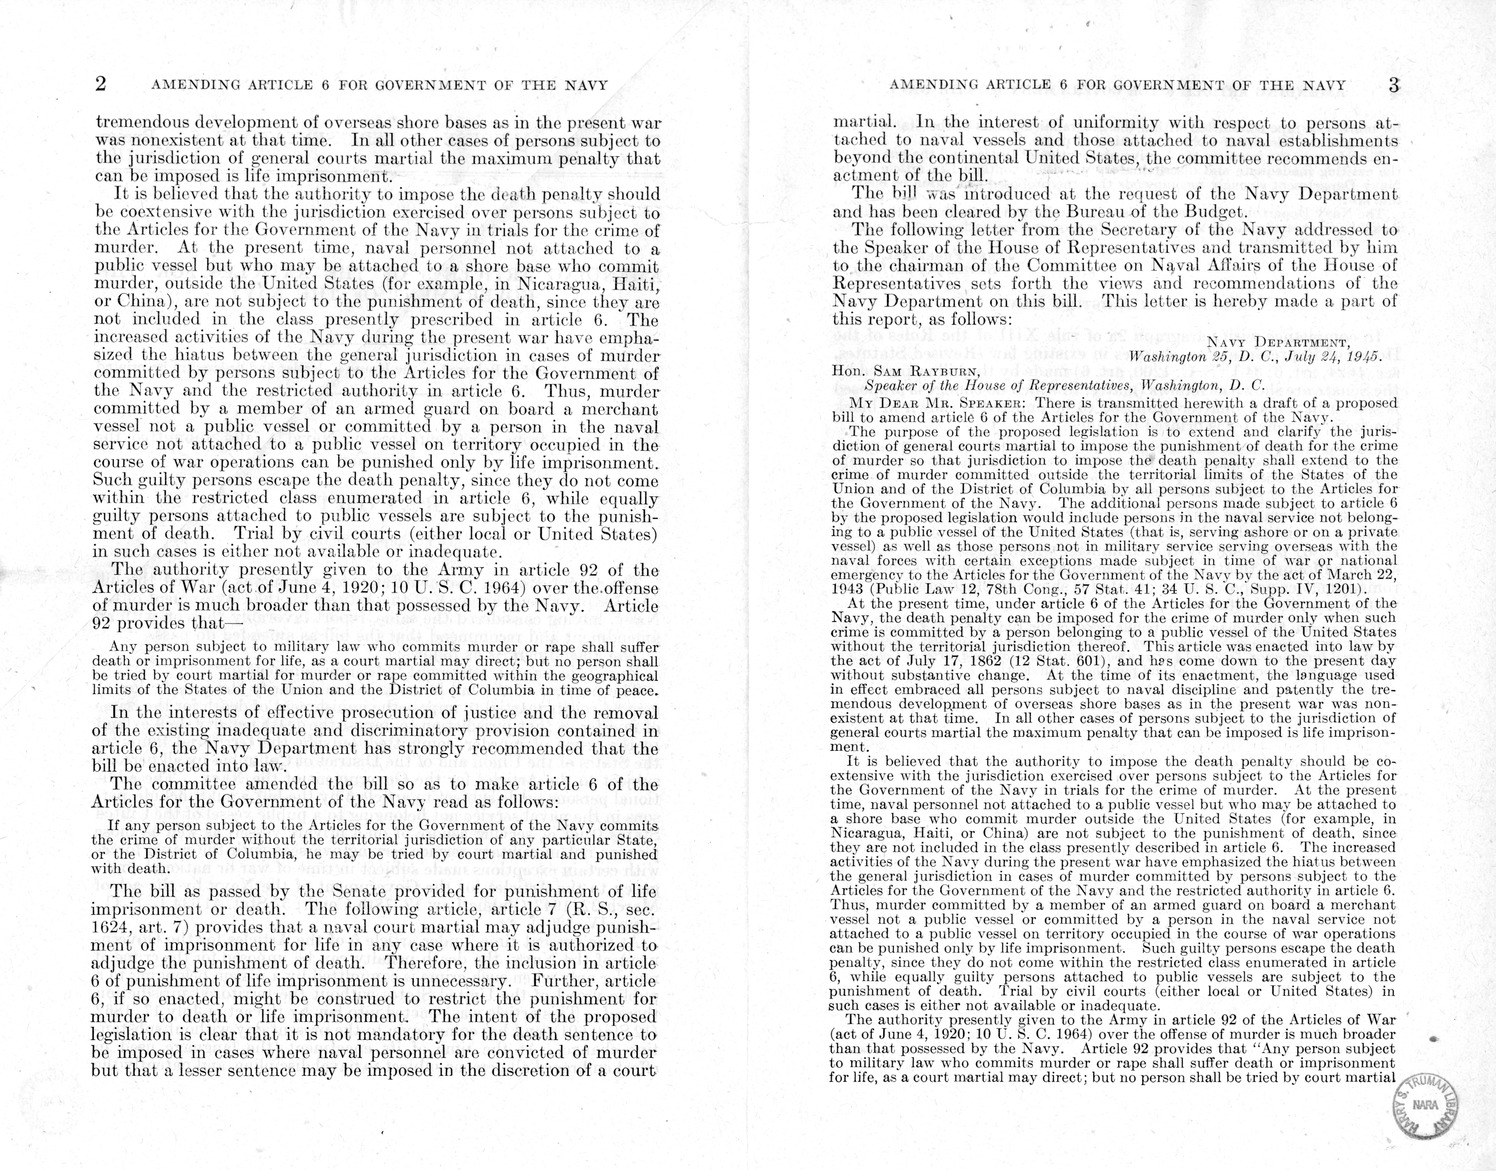 Memorandum from Frederick J. Bailey to M. C. Latta, S. 1308, To Amend Article 6 of the Articles for the Government of the Navy, with Attachments